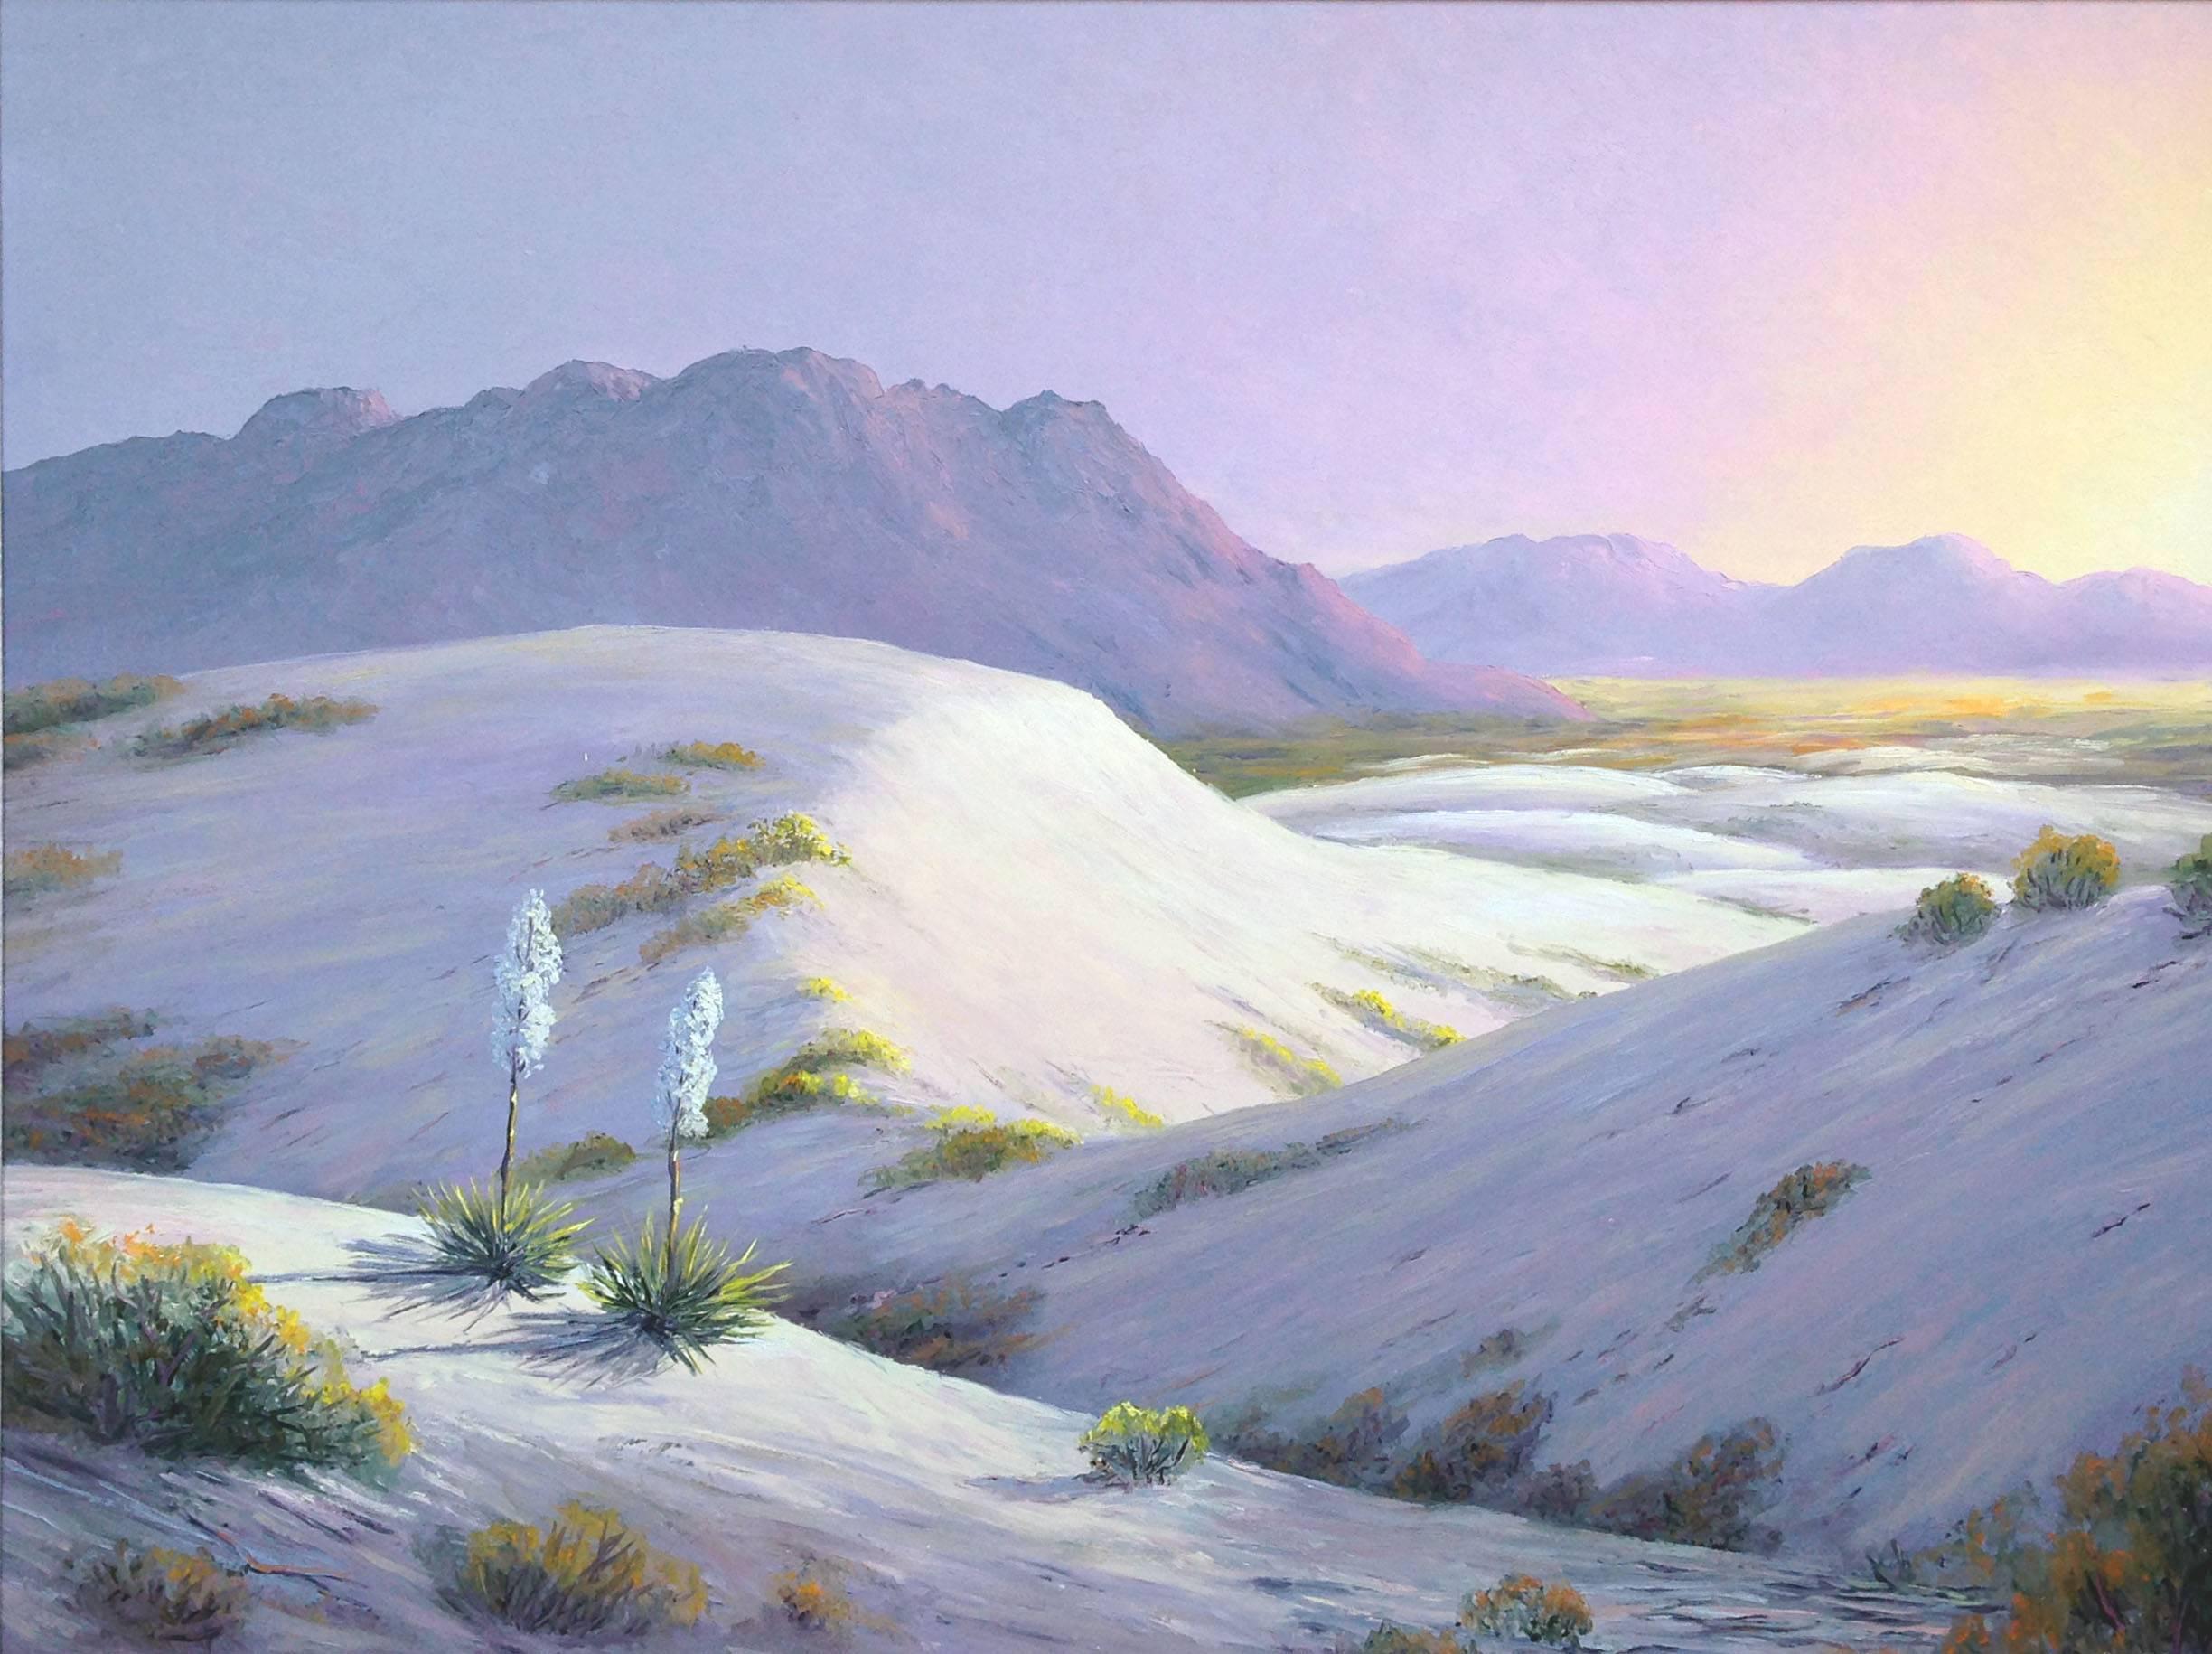 White Sands New Mexico, Mid-Century Southwest Desert Landscape by Vannerson - Painting by Lucien C. Vannerson